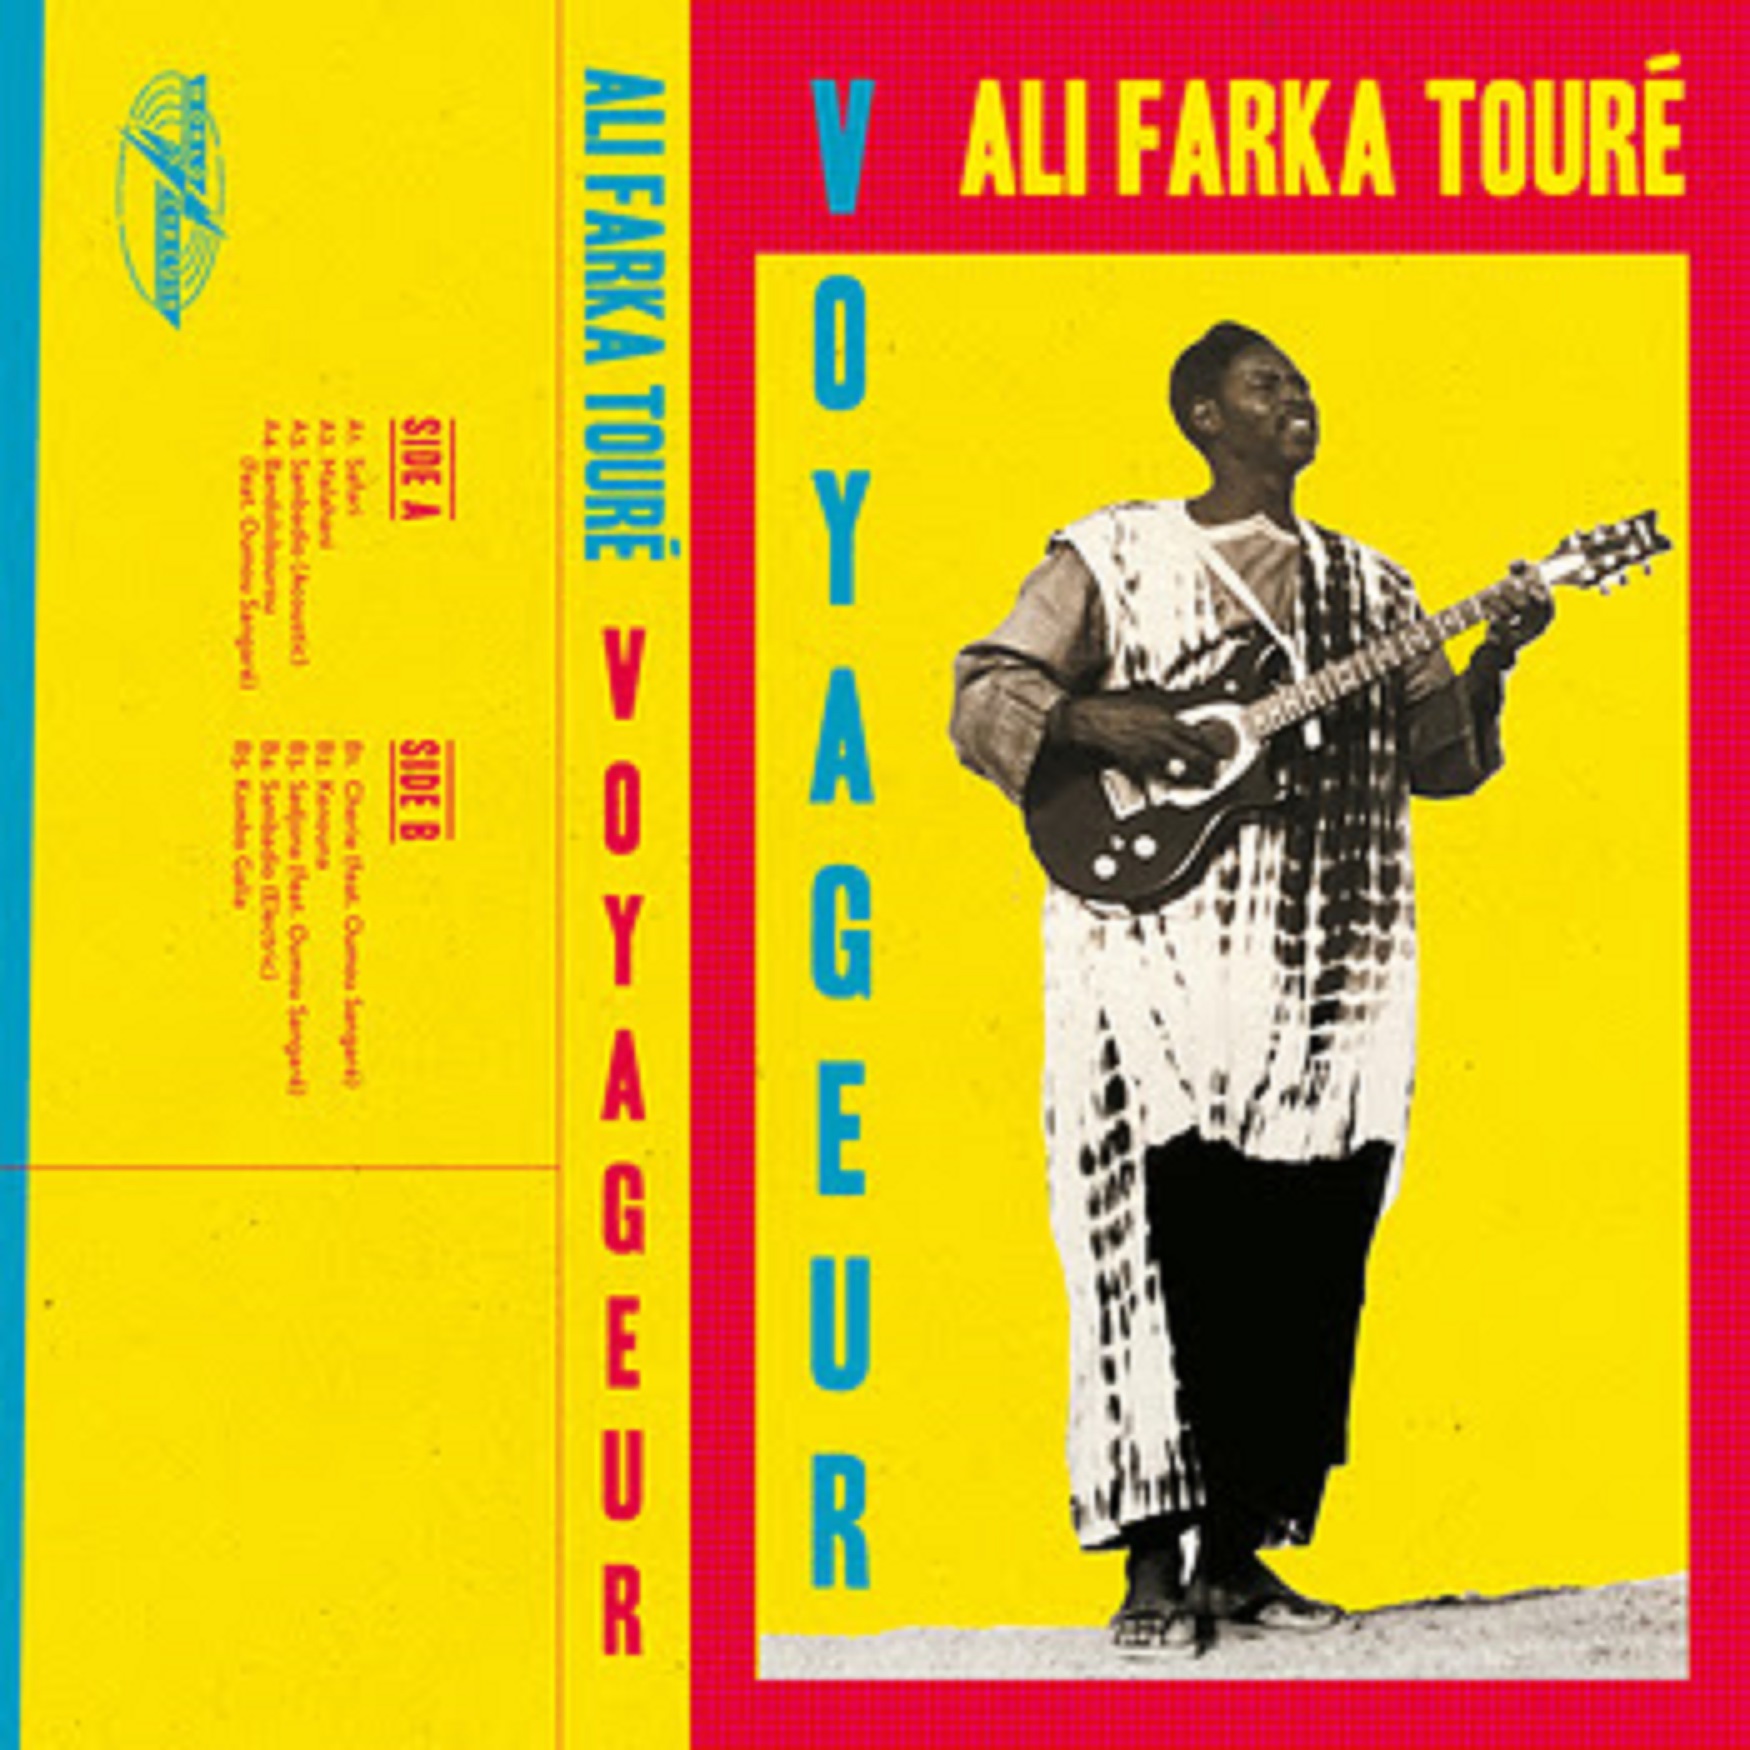 Ali Farka Touré's first new music since 2010, "Voyageur," out posthumously today on World Circuit